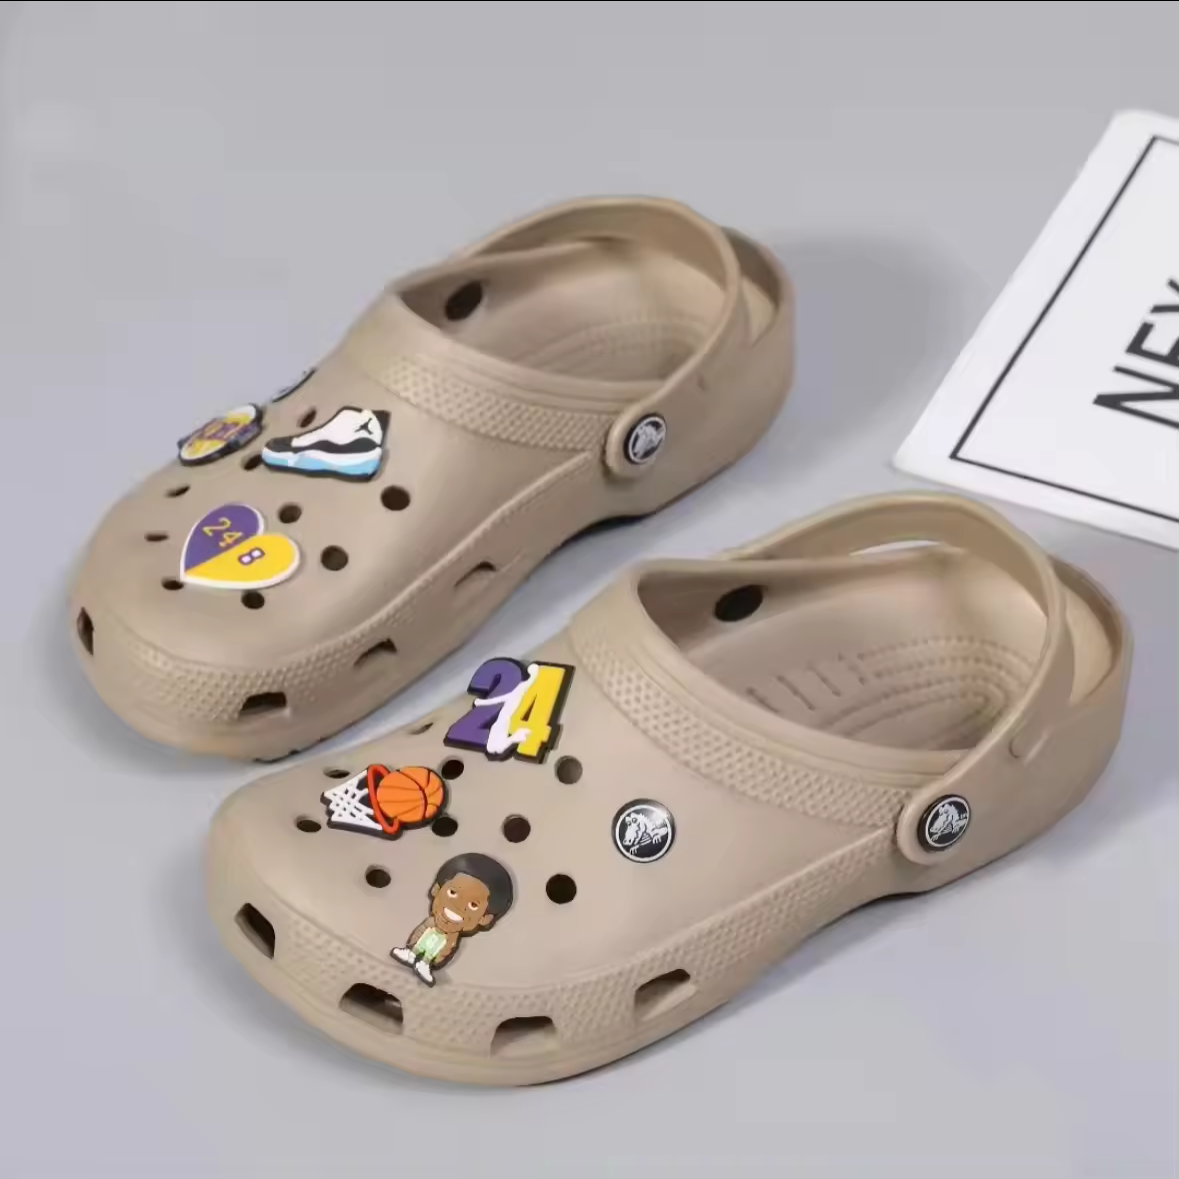 PVC Daily Wear Crocs Slippers at Rs 2070 in Bengaluru | ID: 22629916773-saigonsouth.com.vn